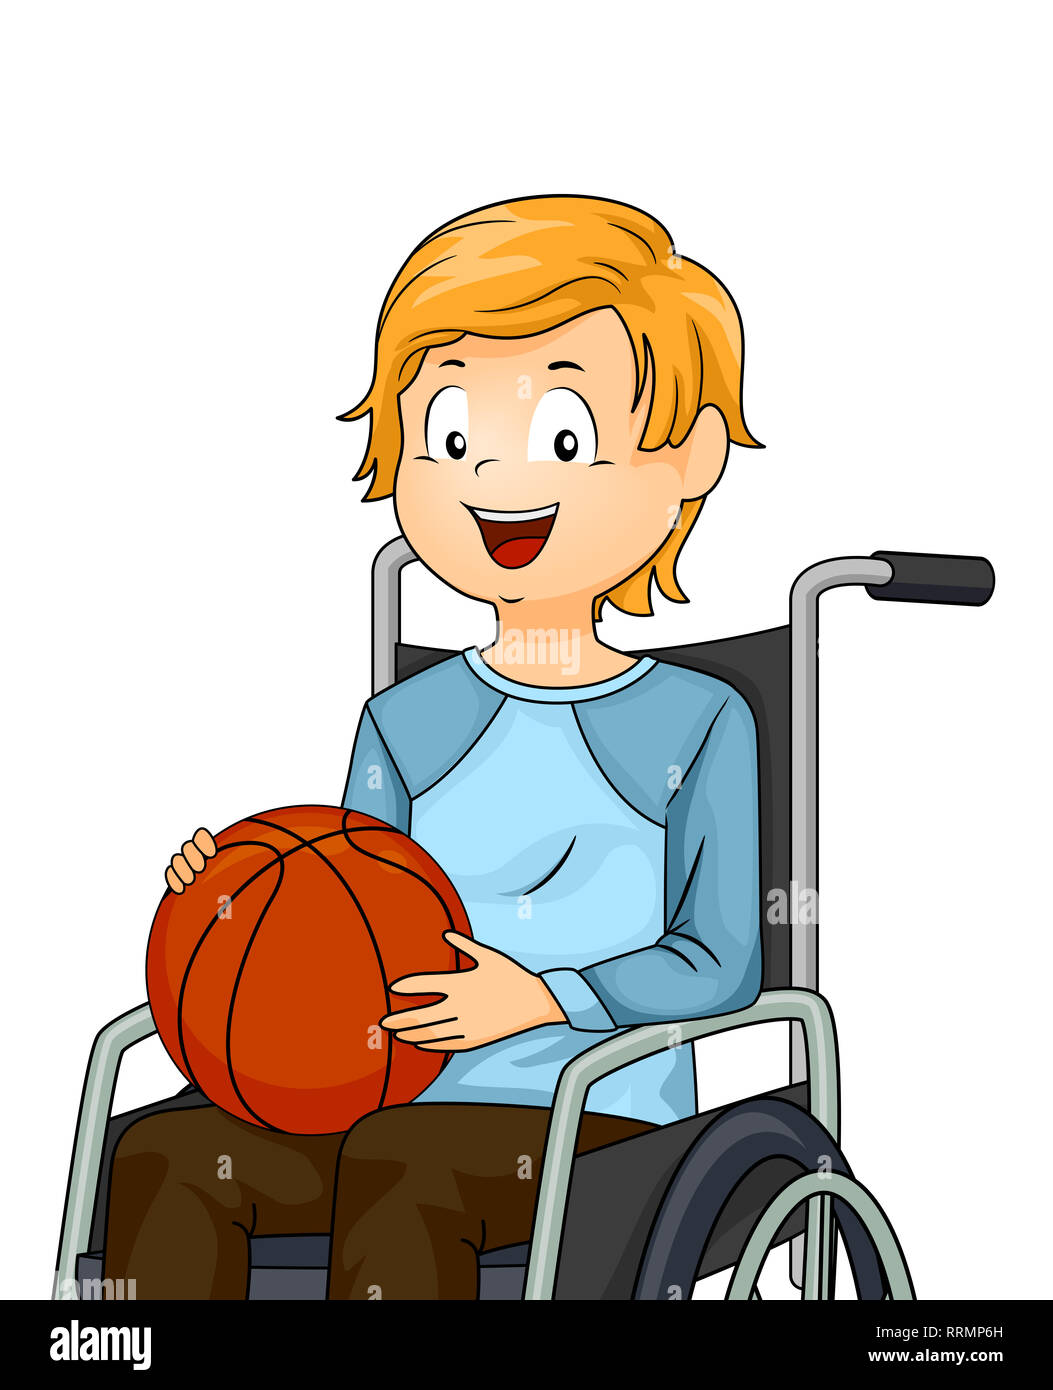 Illustration of a Kid Boy On Wheelchair Playing Basketball Stock Photo